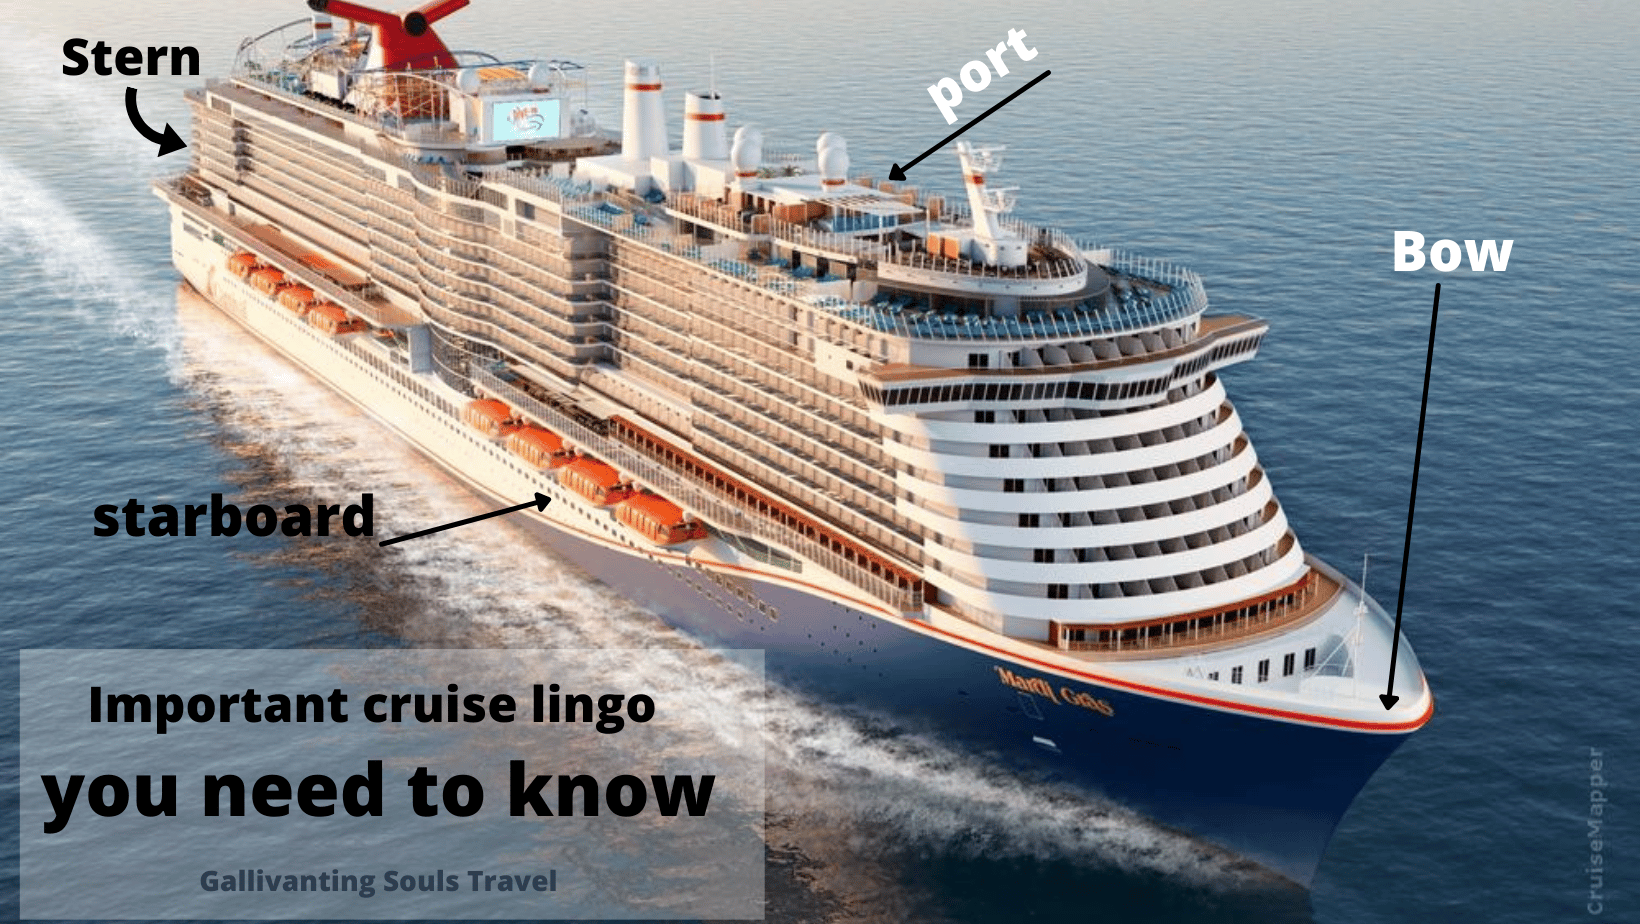 Important cruise lingo you need to know